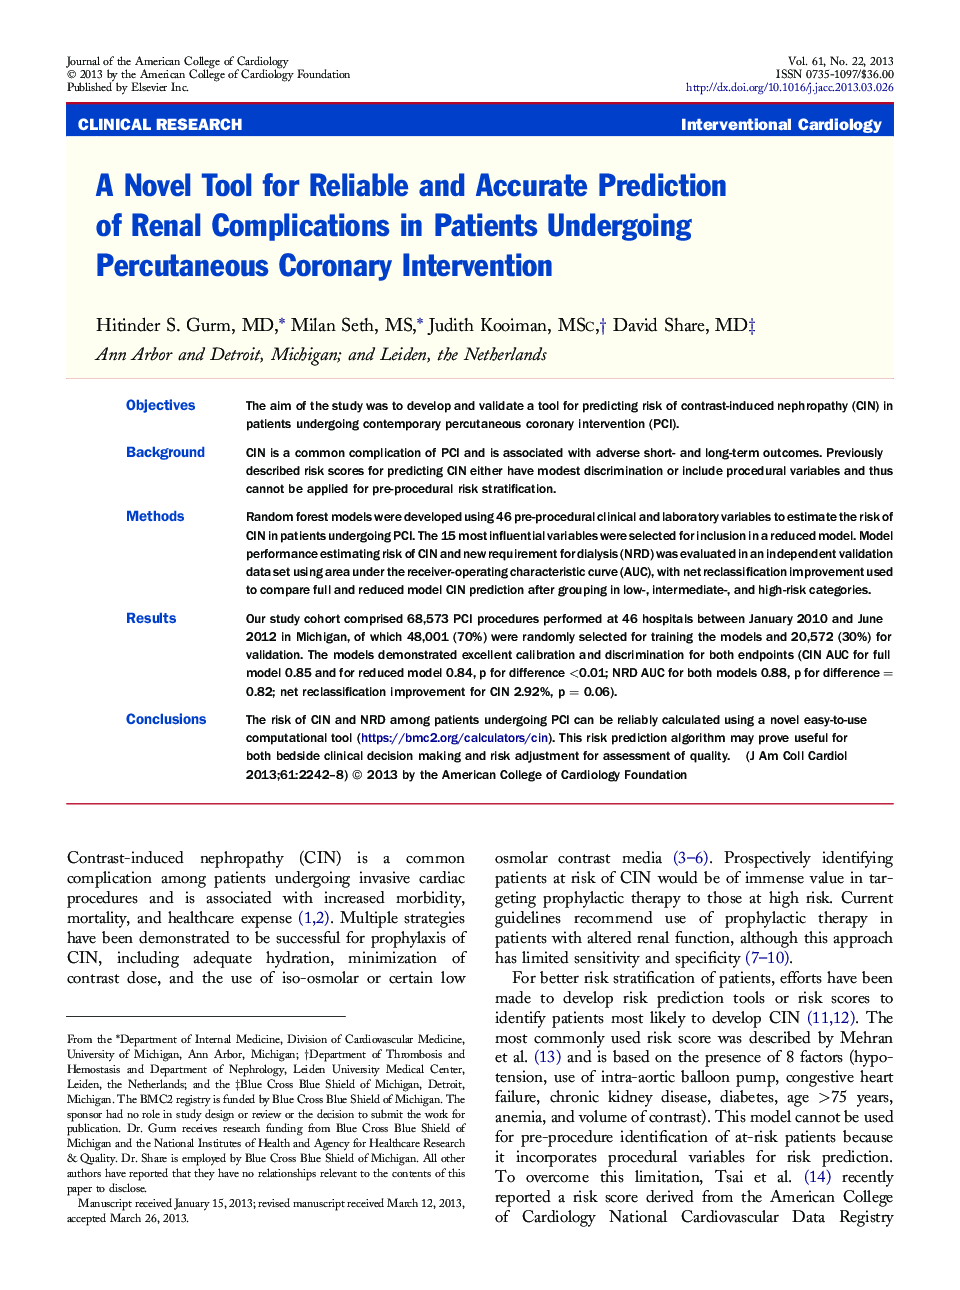 A Novel Tool for Reliable and Accurate Prediction of Renal Complications in Patients Undergoing Percutaneous Coronary Intervention 